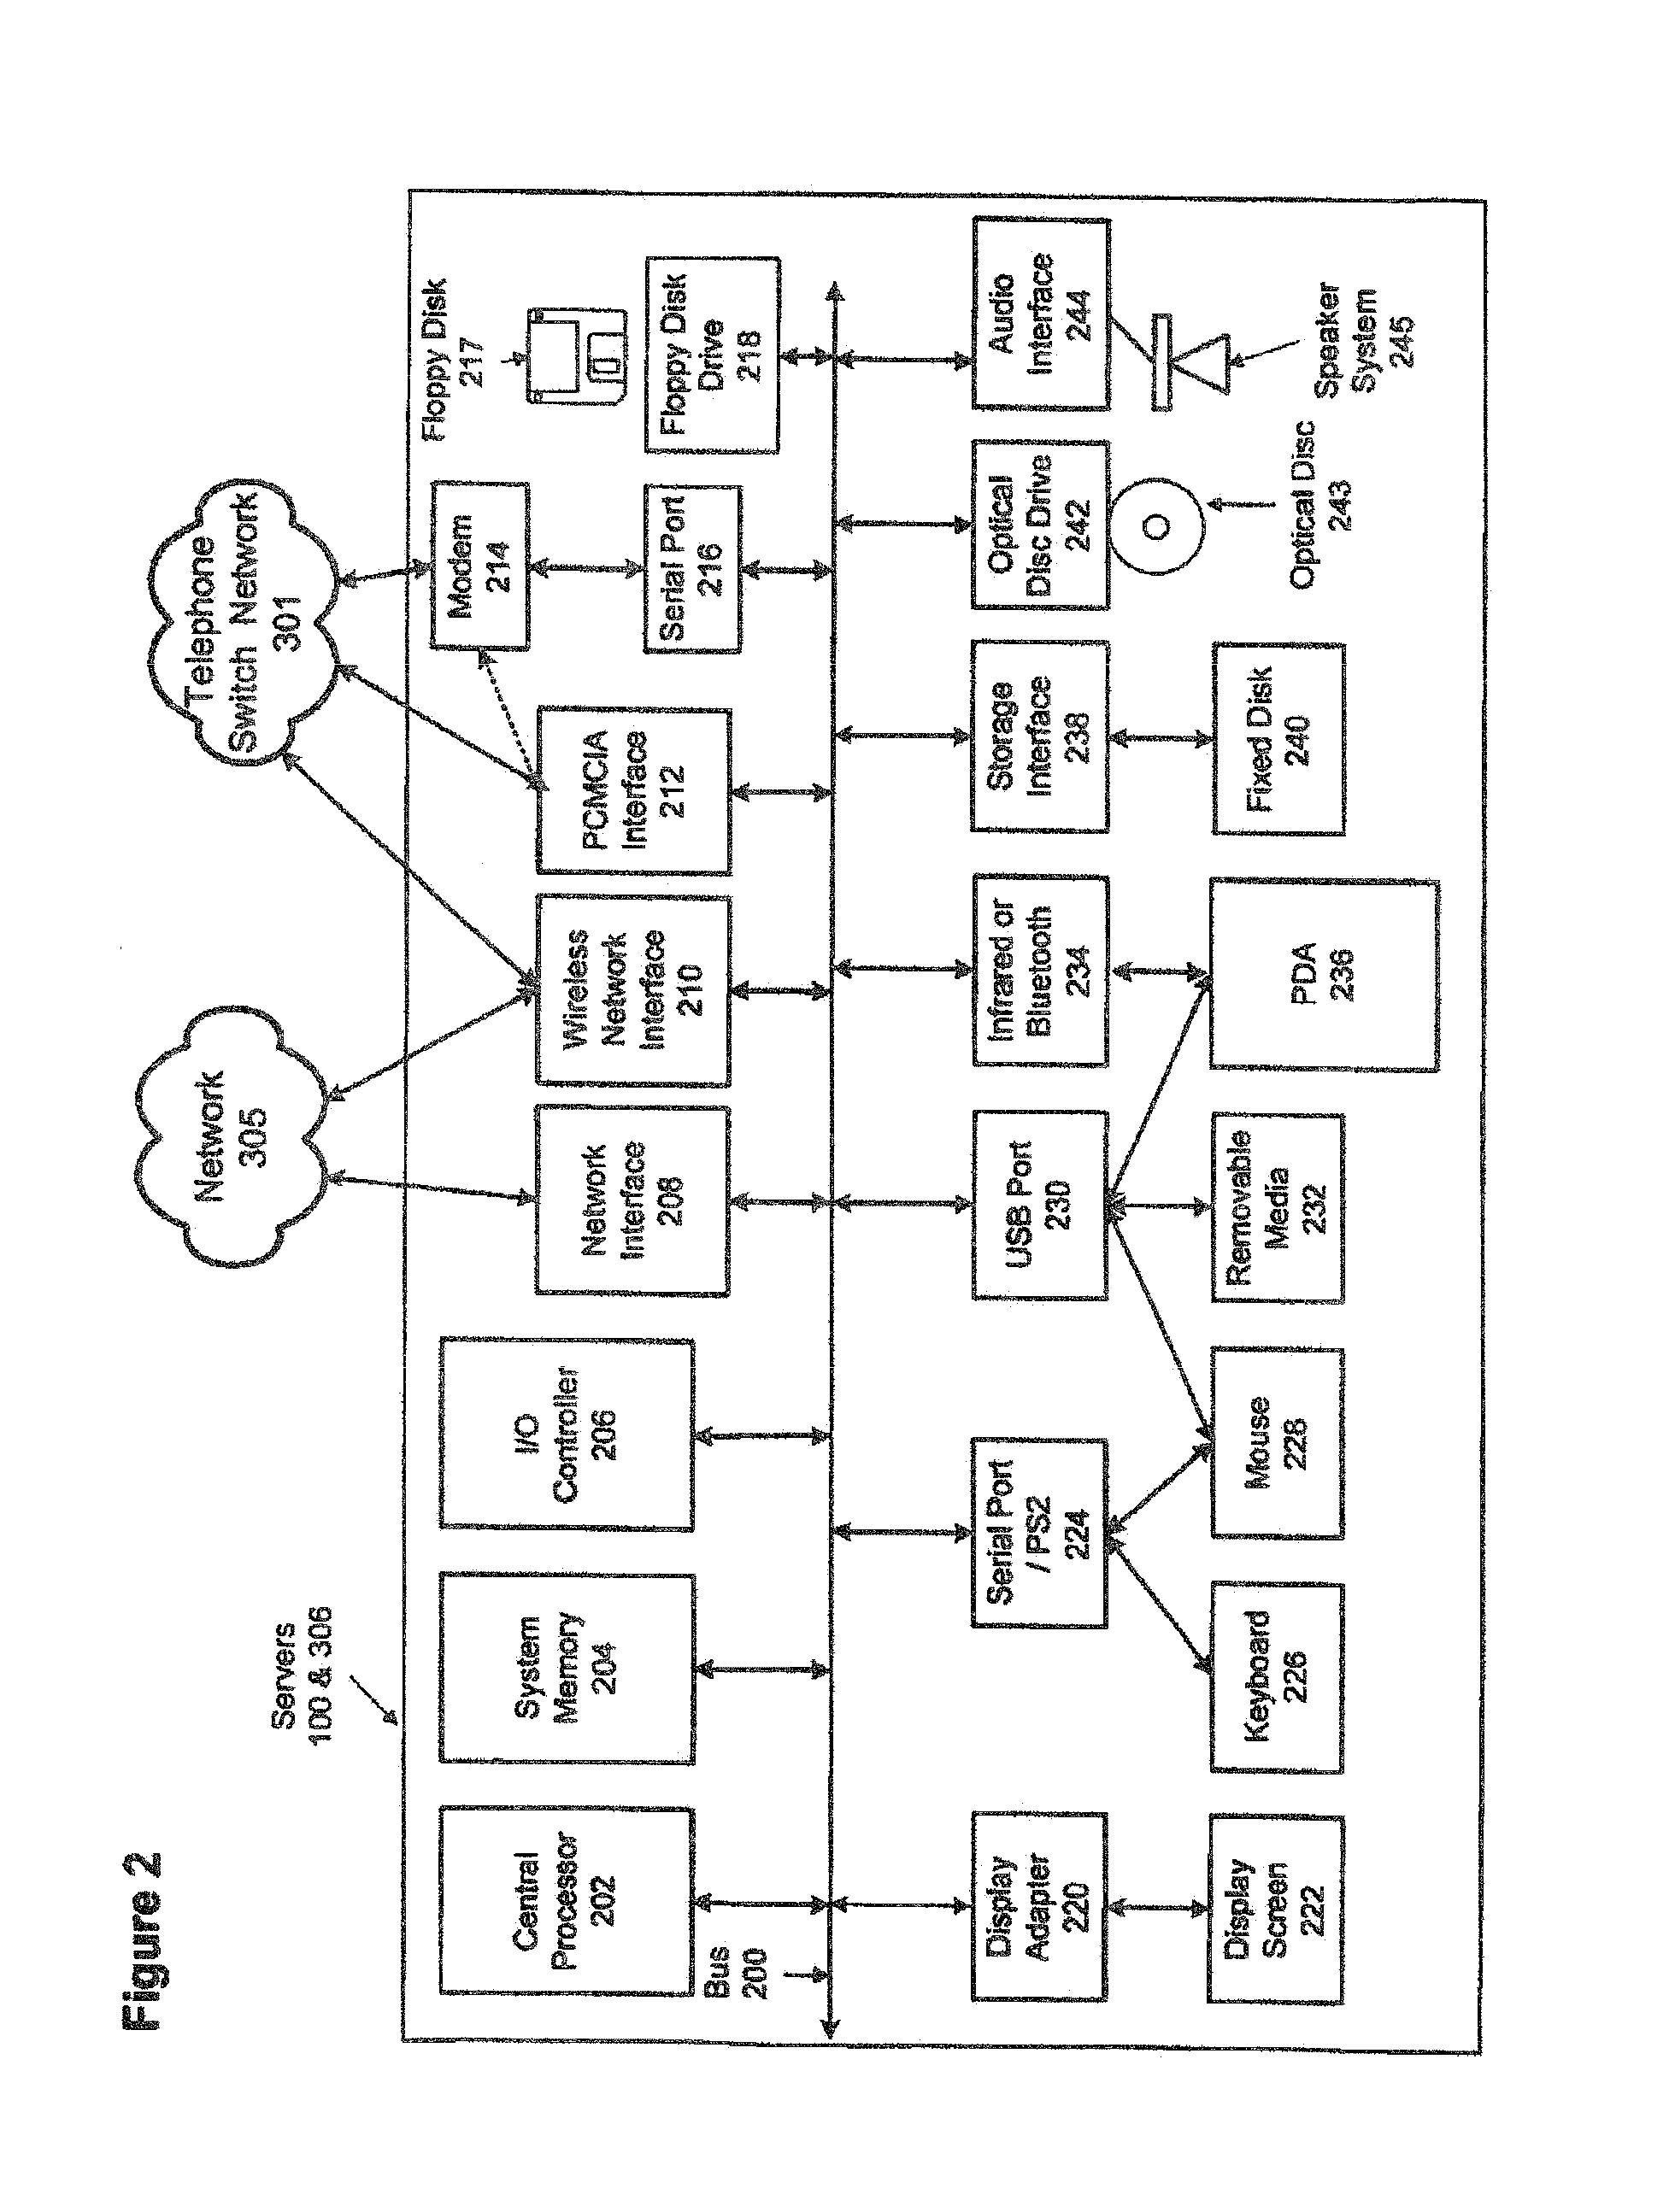 System and method utilizing voice search to locate a product in stores from a phone